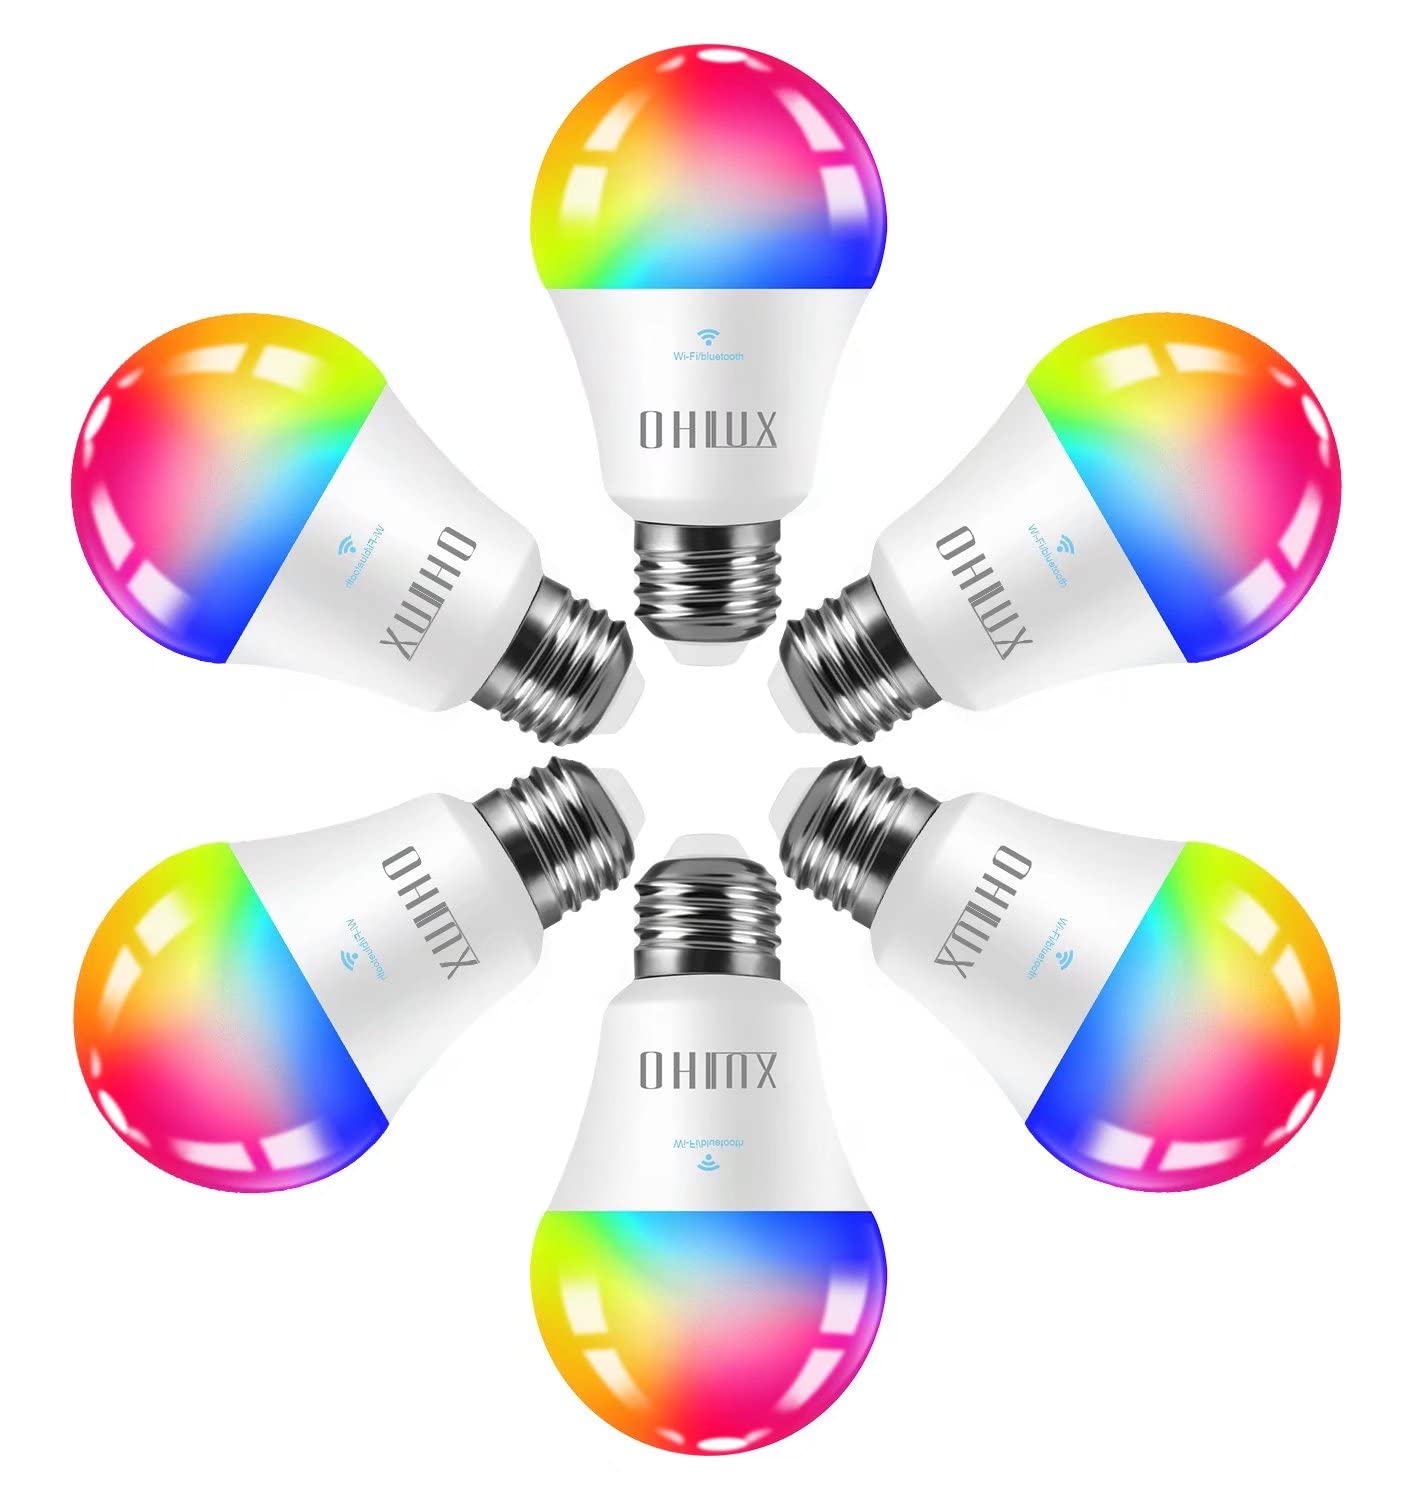 OHLUX Smart WiFi LED Light Bulbs Compatible with Alexa and Google Home (No Hub Required), RGBCW Multi-Color, Warm to Cool White Dimmable, 60W Equivalent, 7W E26 A19 Color Changing Bulb-6PACK